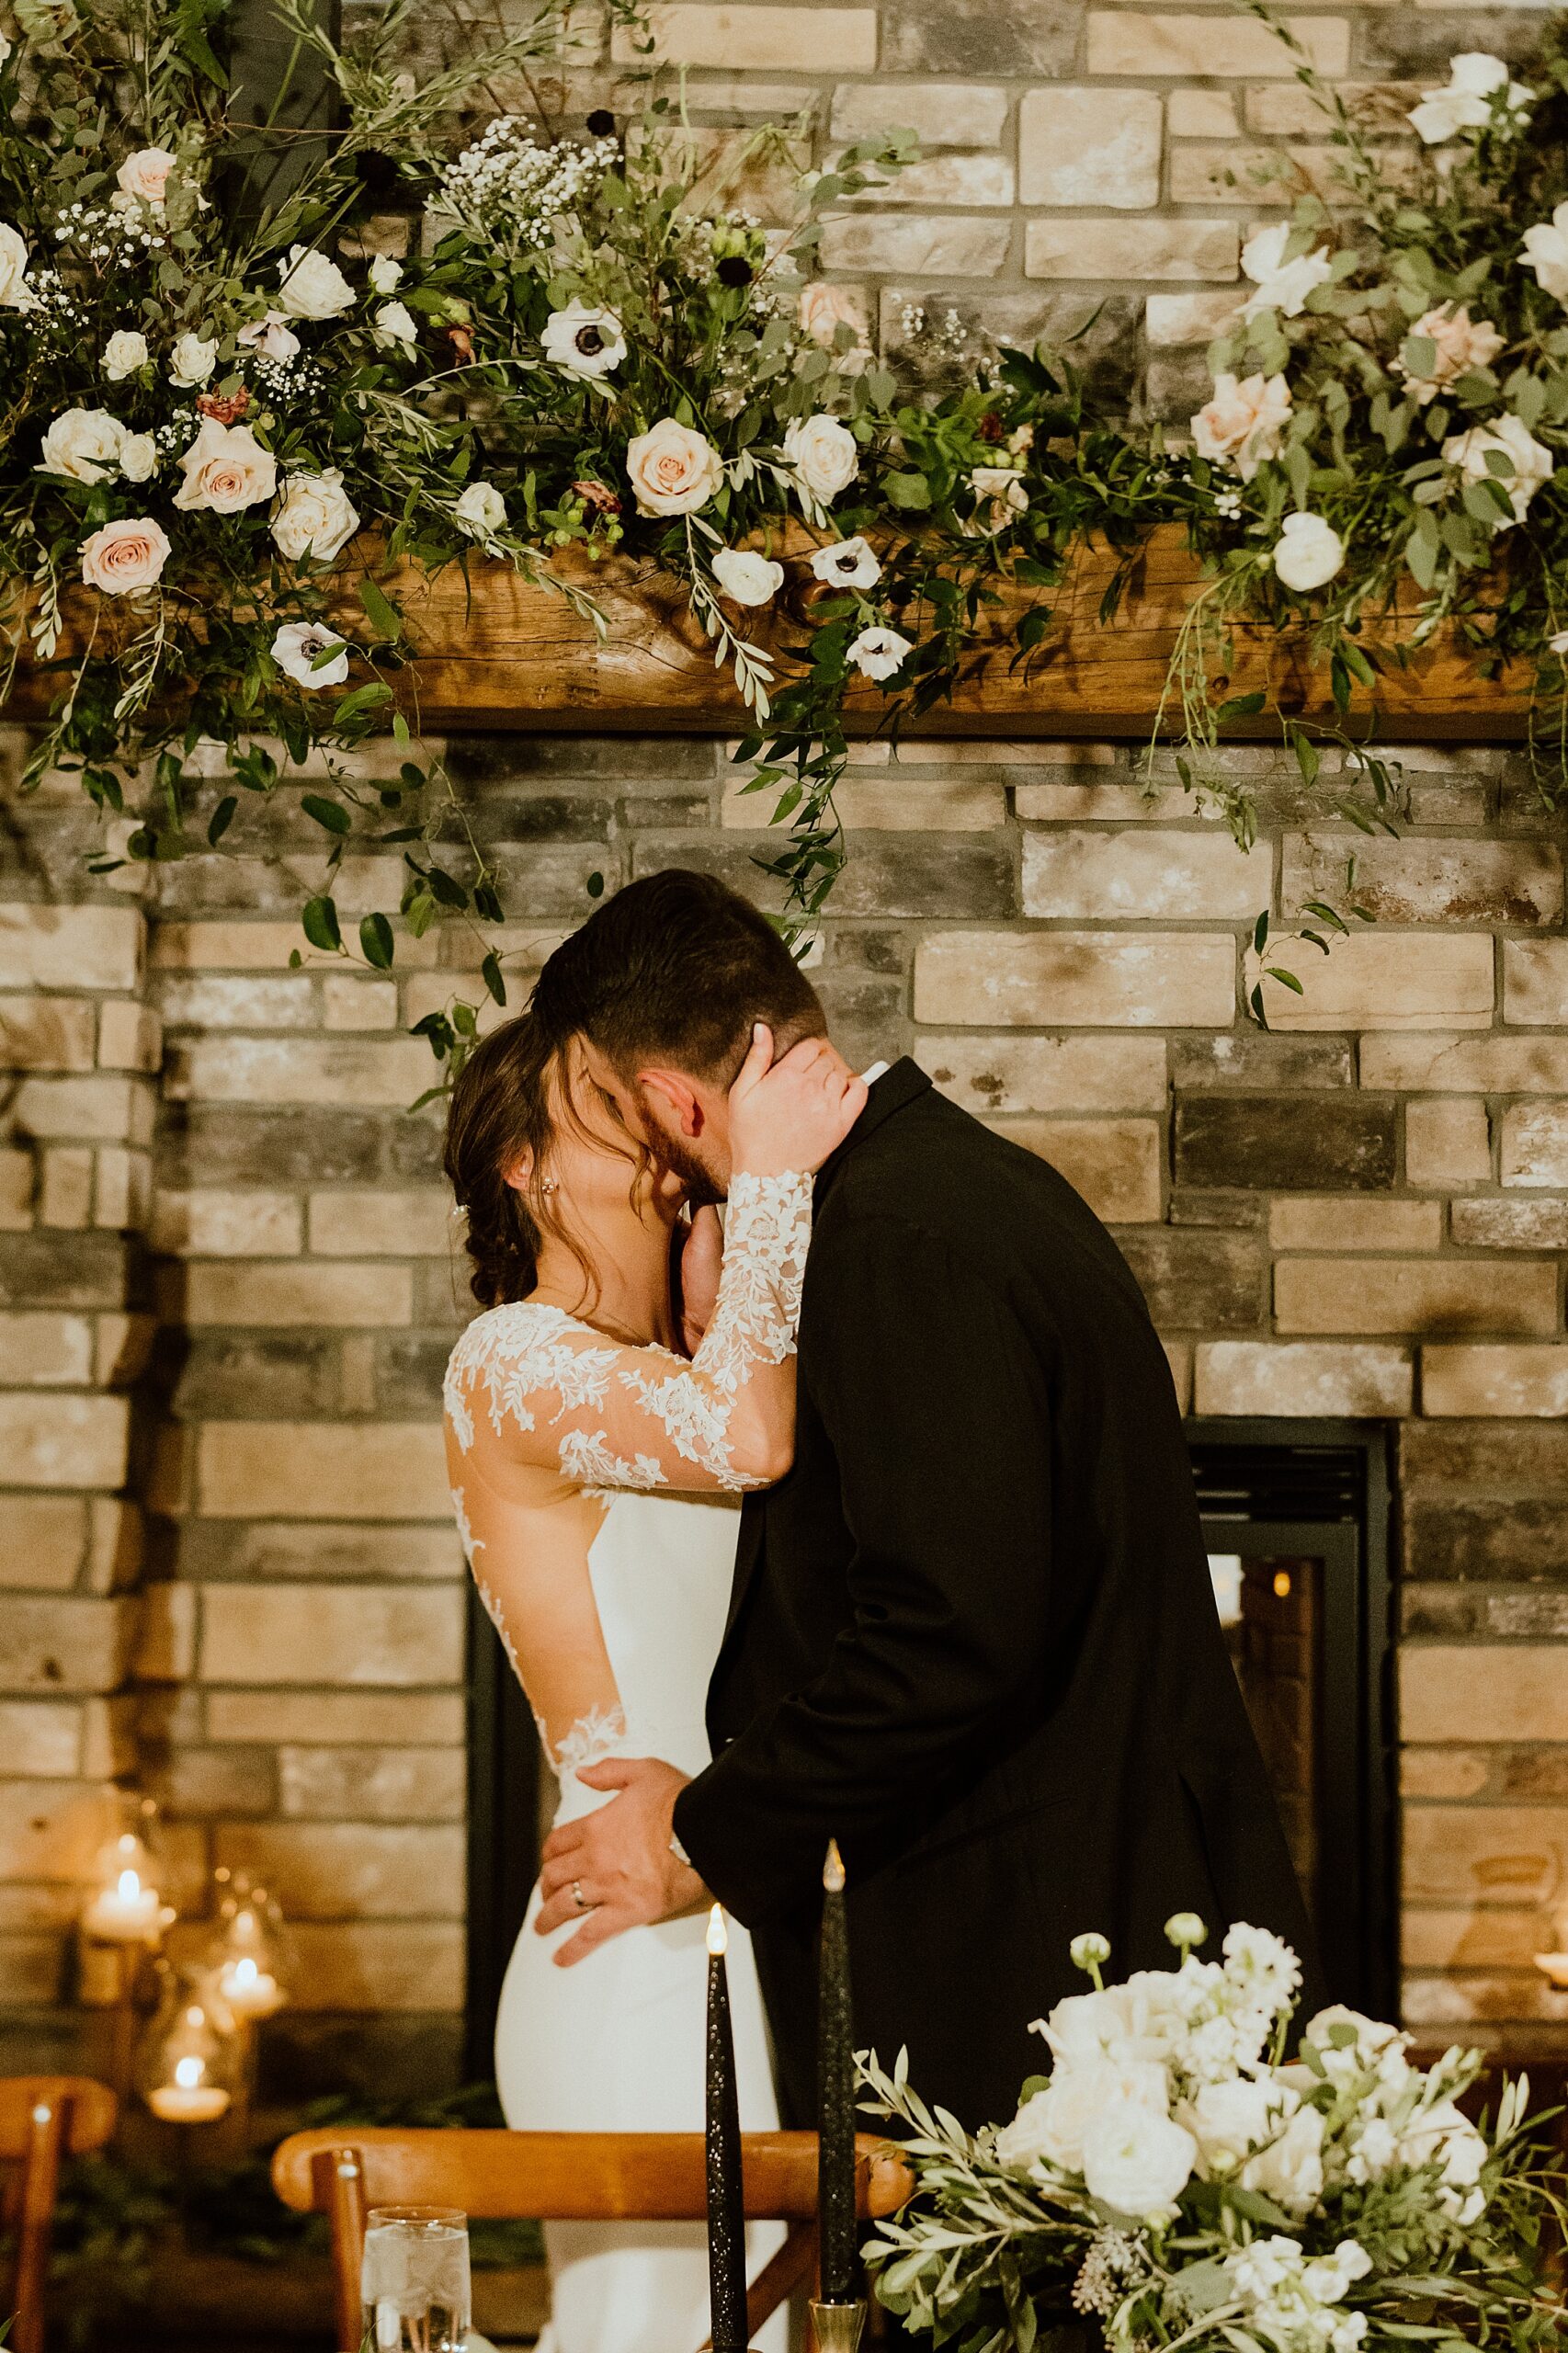 epic wedding photos involve smart placement of head table, florals, and lighting as bride and groom share head table kiss